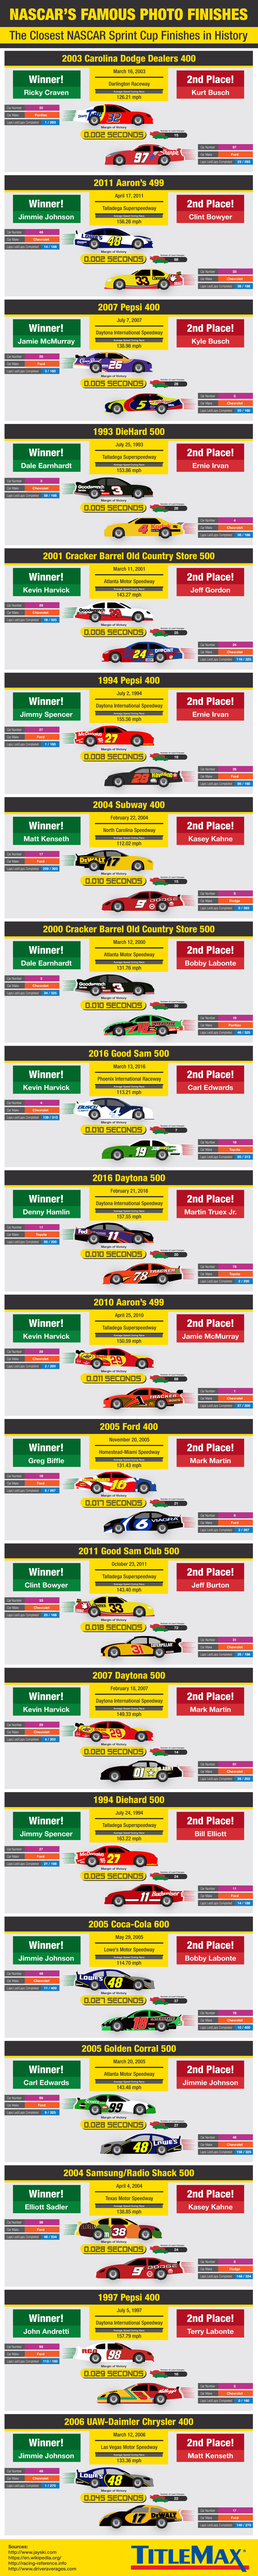 Closest Finishes in NASCAR Cup Series History - Sports Infographic